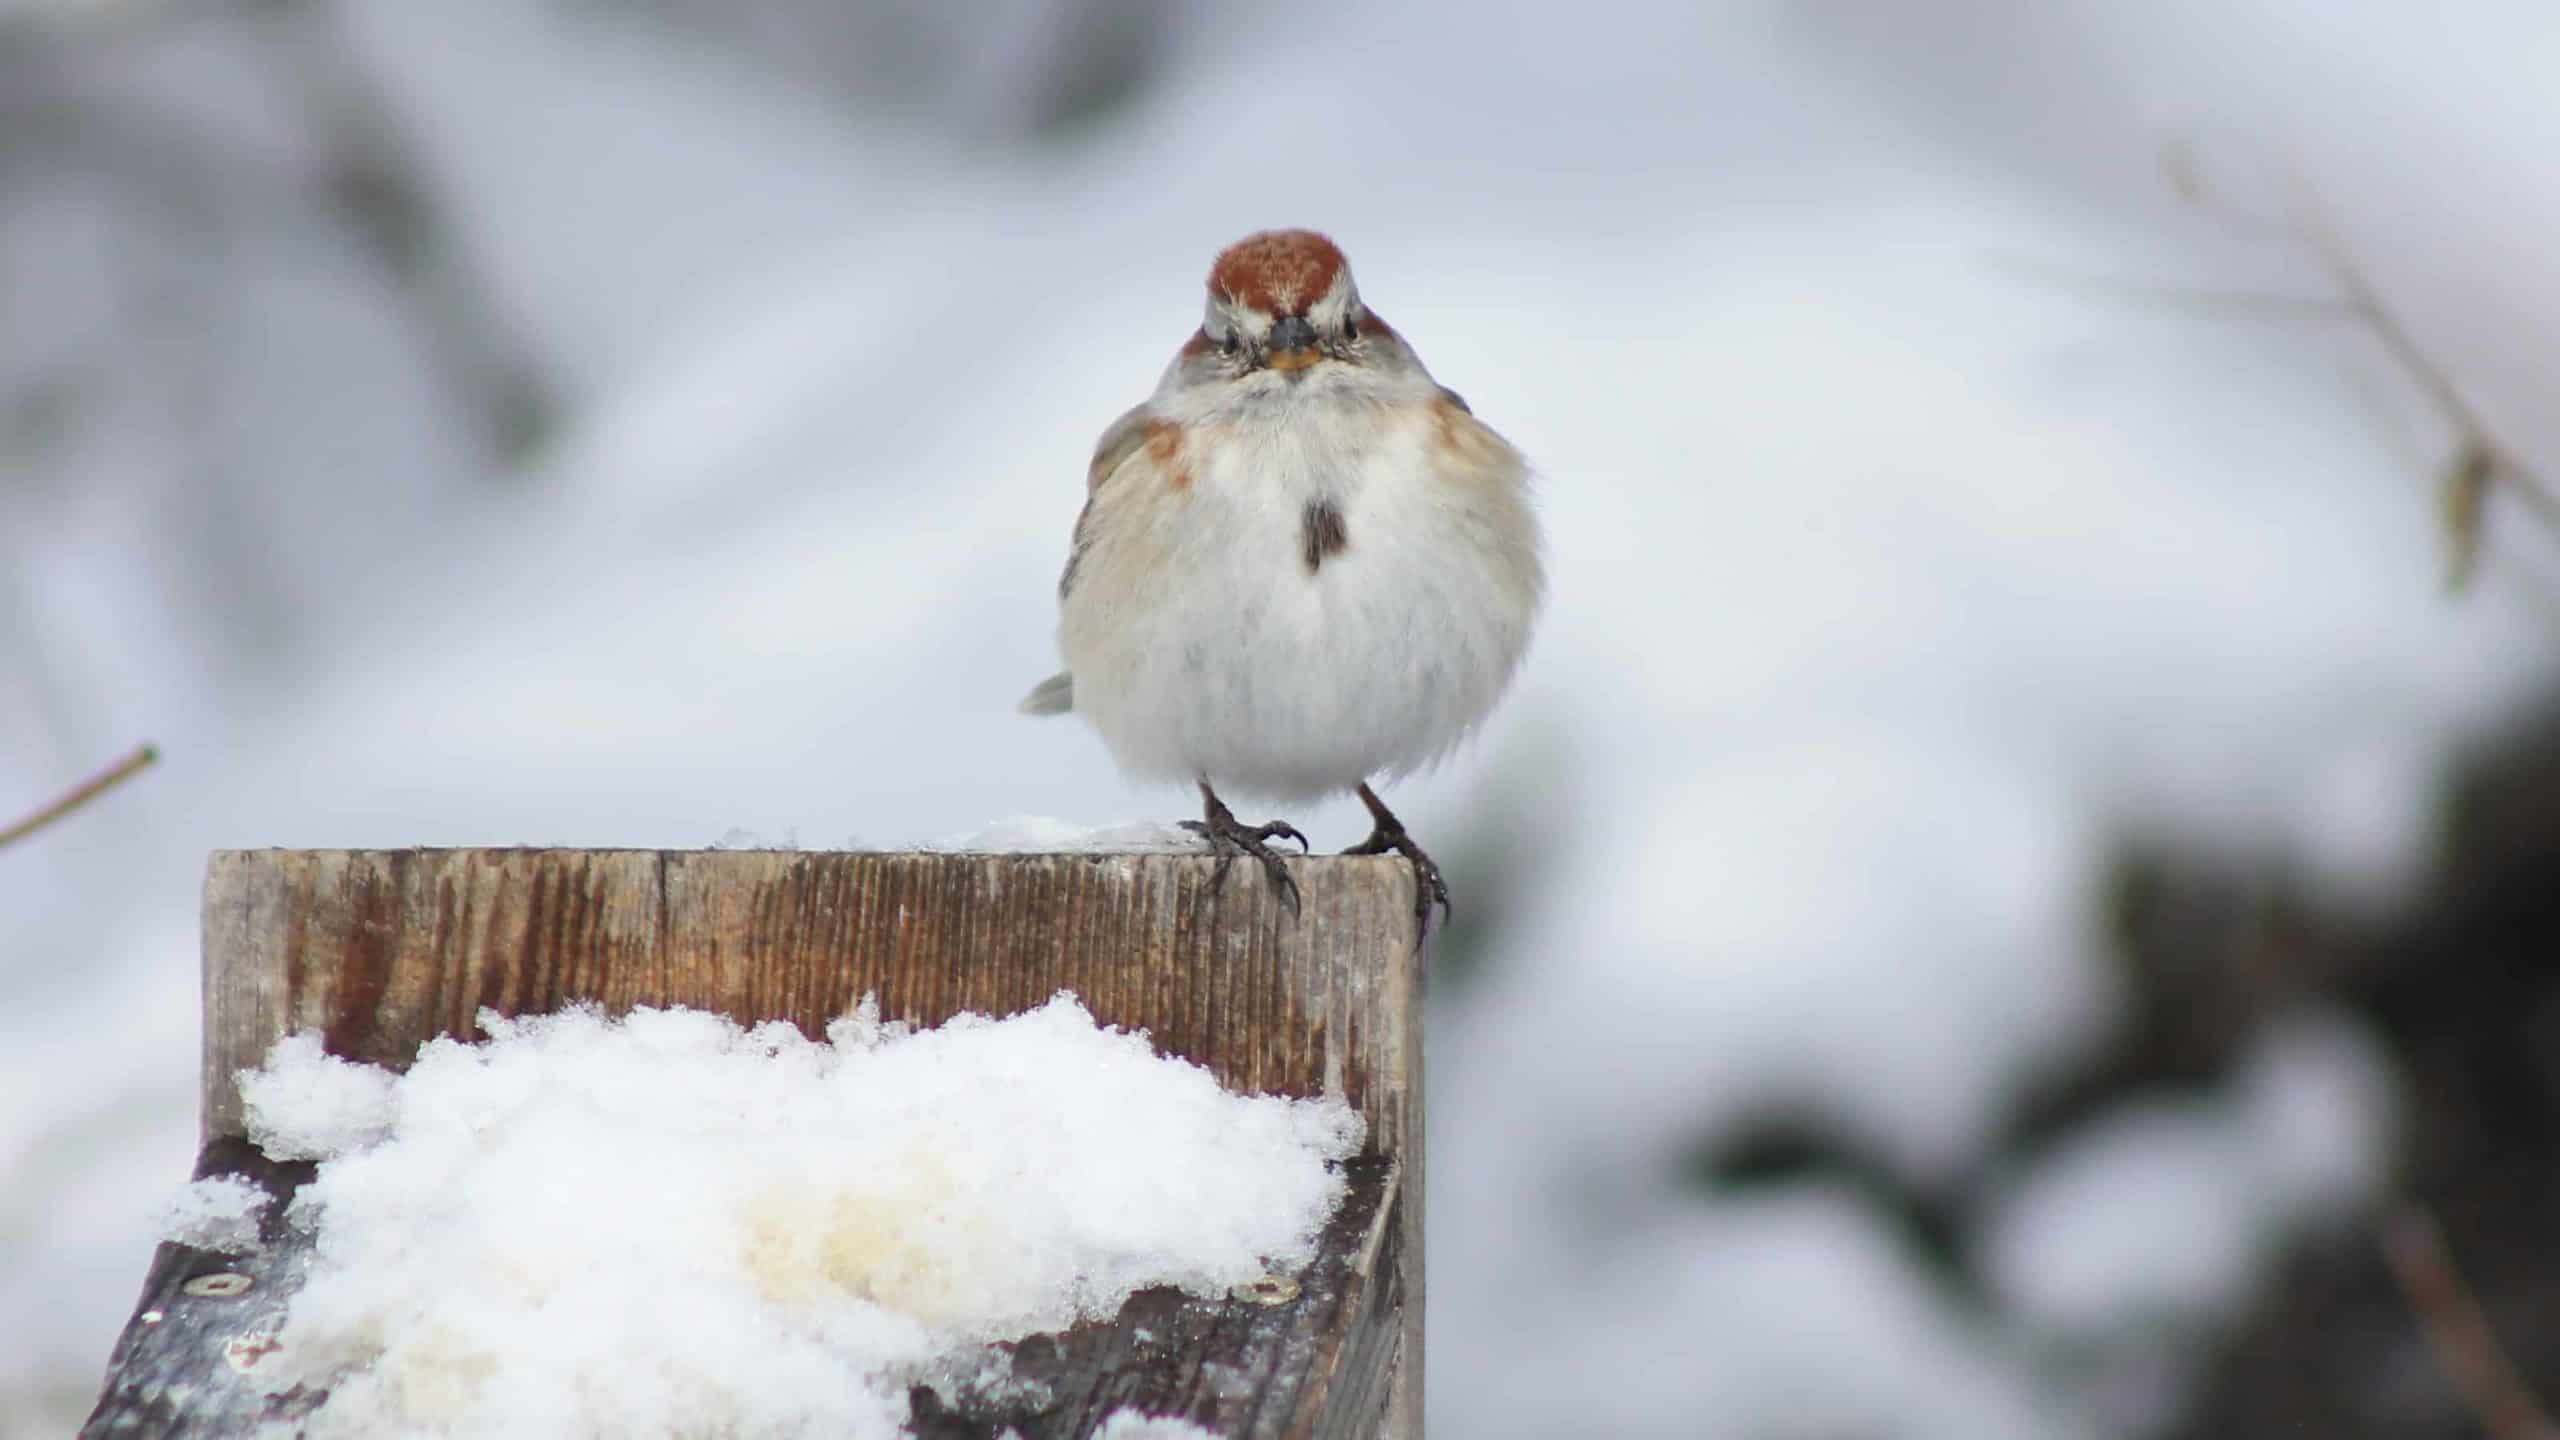 A sparrow fluffs up in the snow. Photo by Zachary Adams, naturalist at Pleasant Valley Sanctuaries.